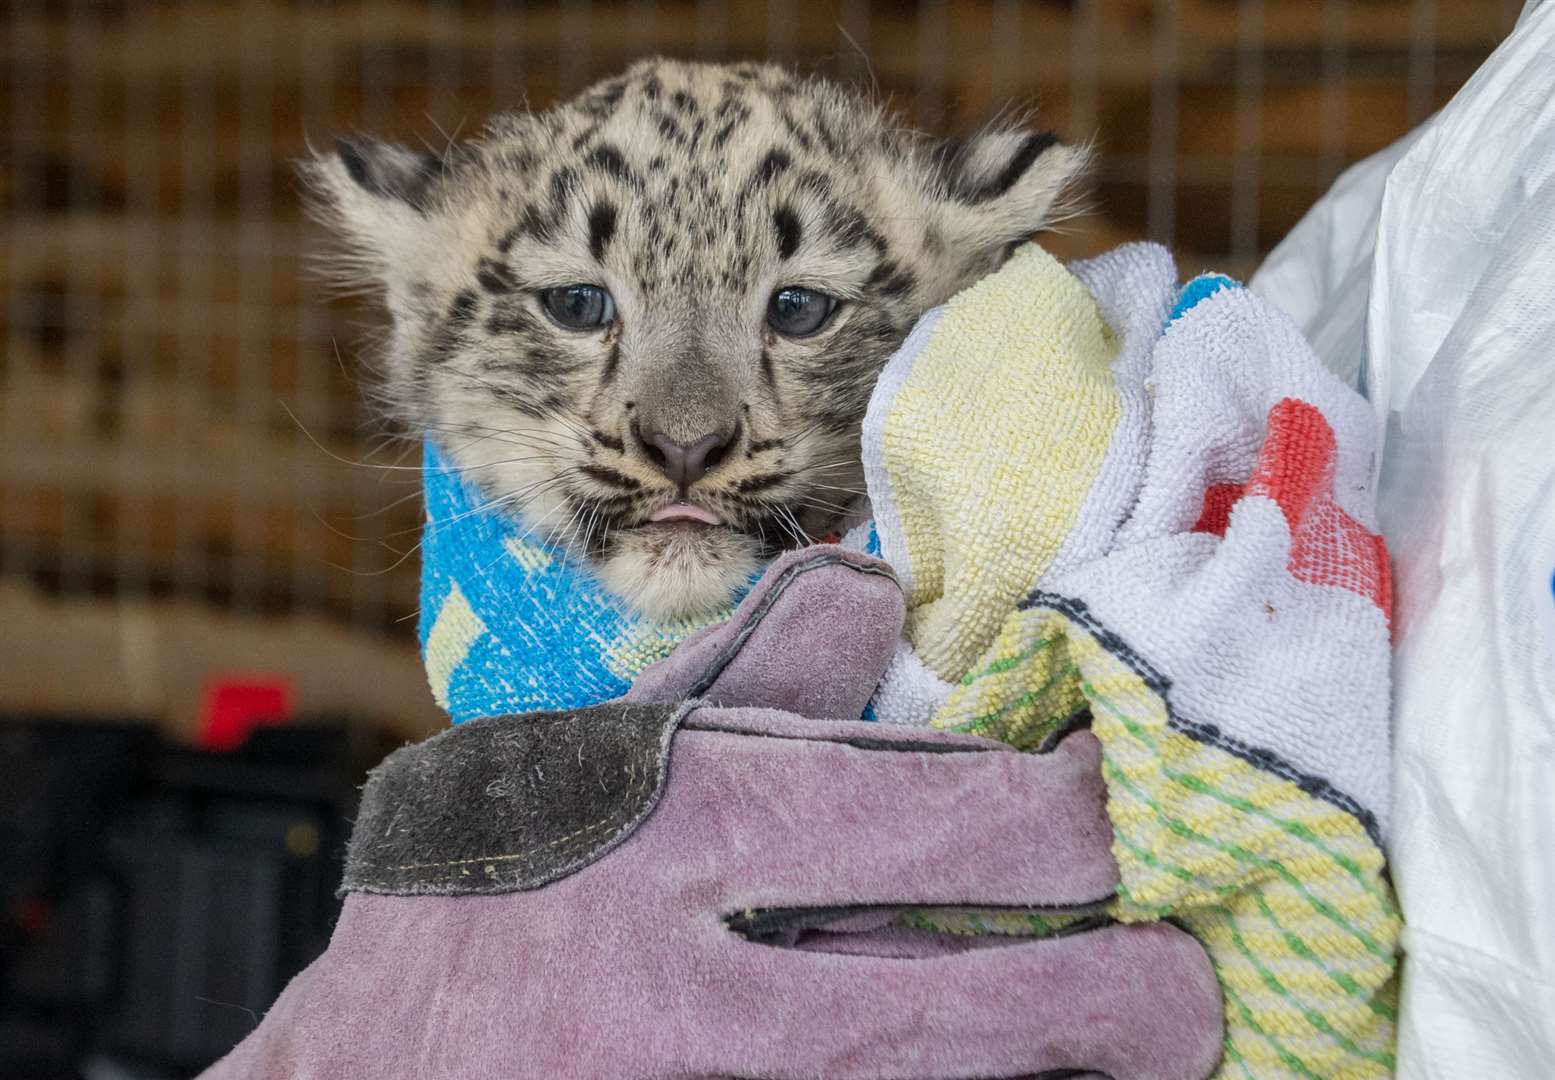 The snow leopard cubs received their first health check at the Highland Wildlife Park.